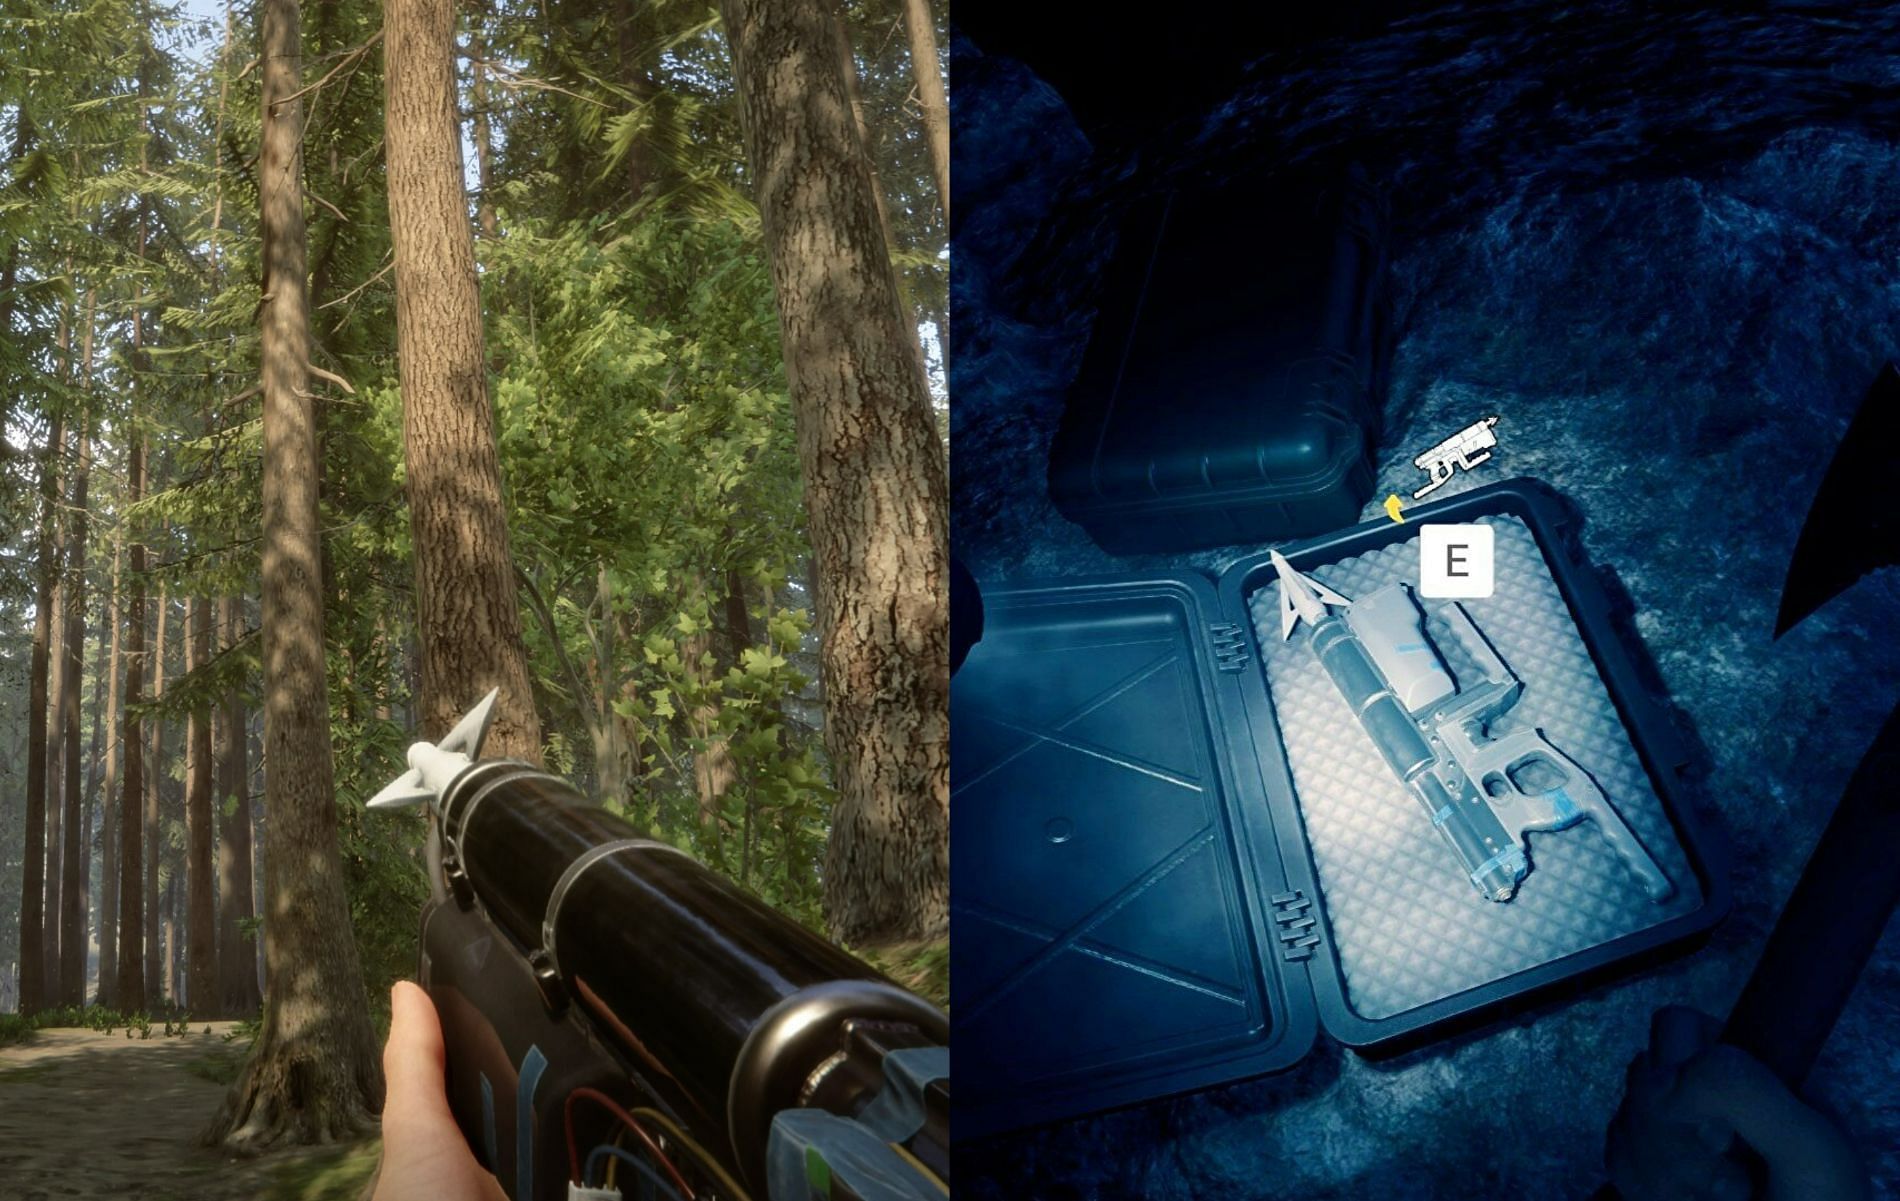 Obtain and using the Rope/Zipline gun in Sons of the Forest (Images via Sons of the Forest)